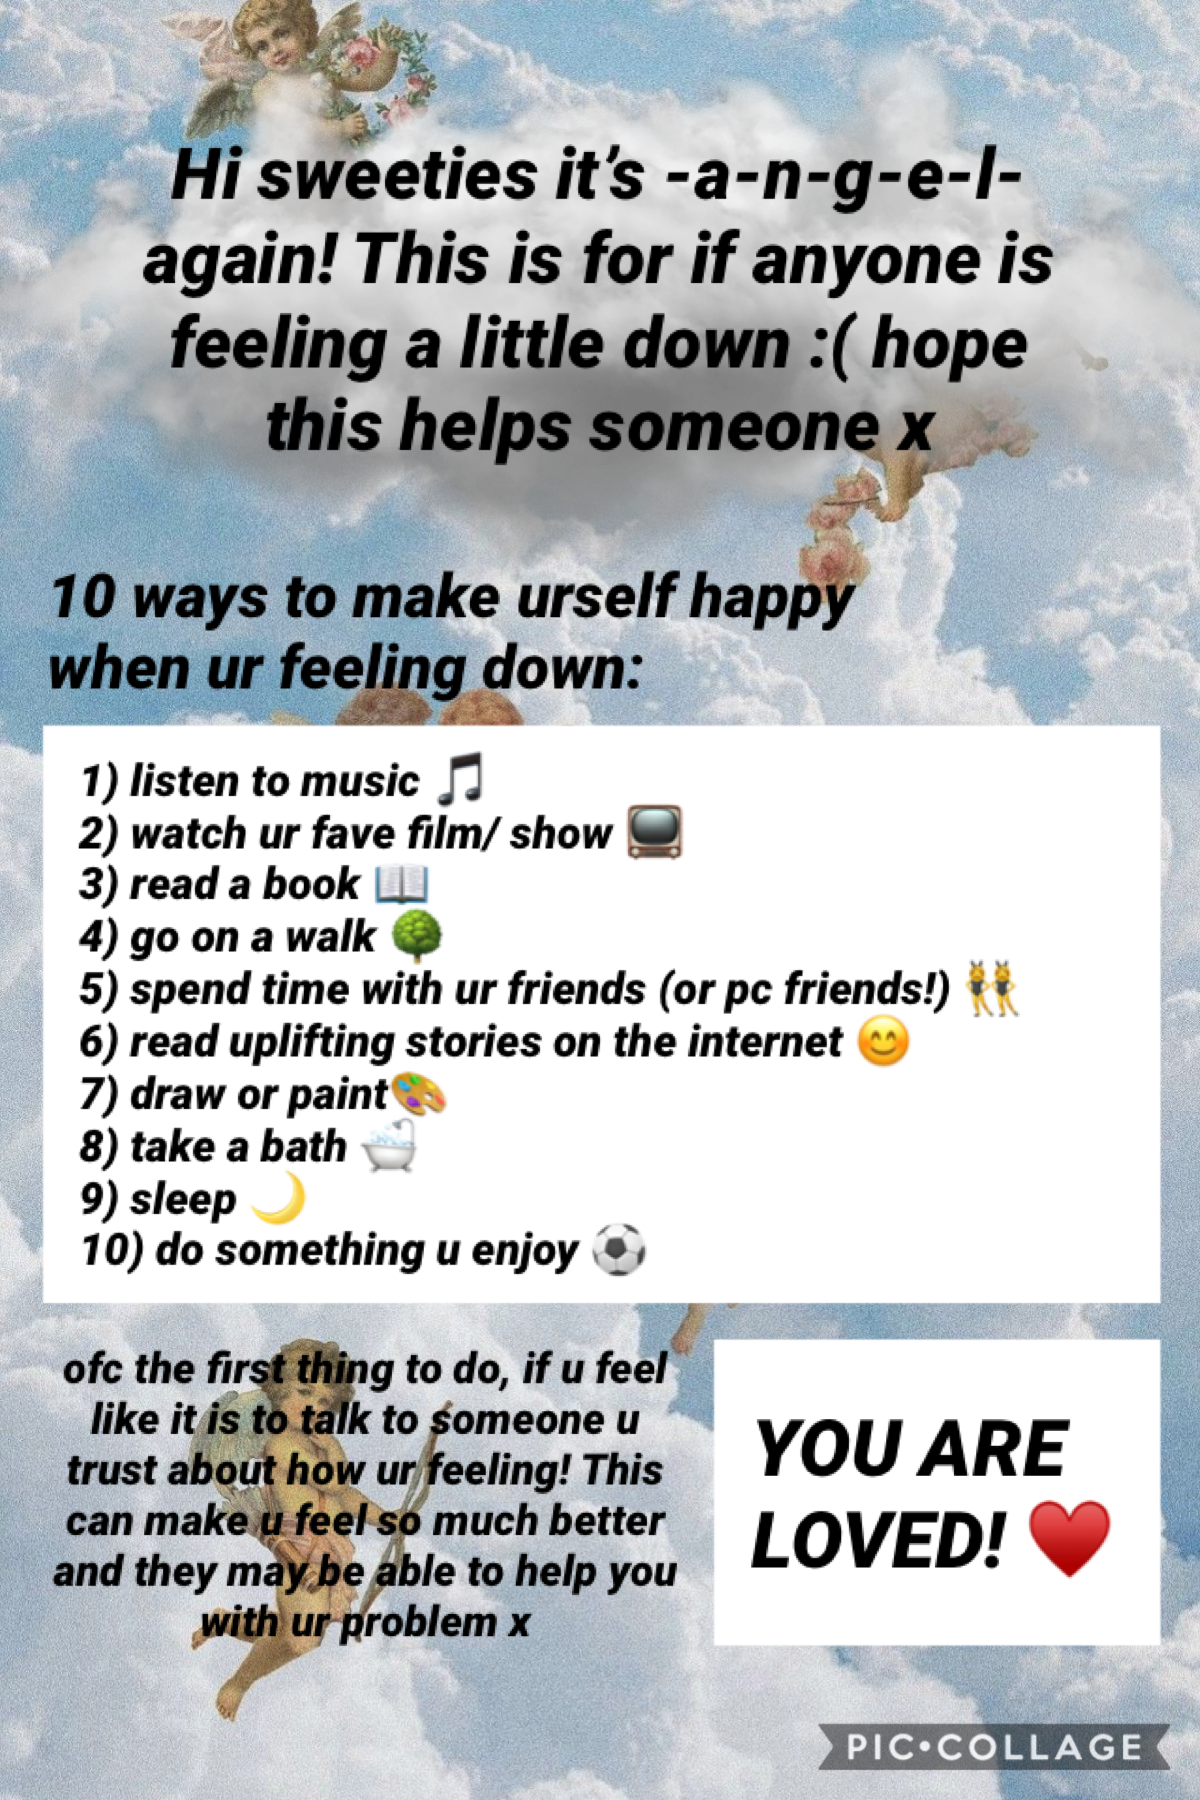 😇angel here! Hope this helps😇